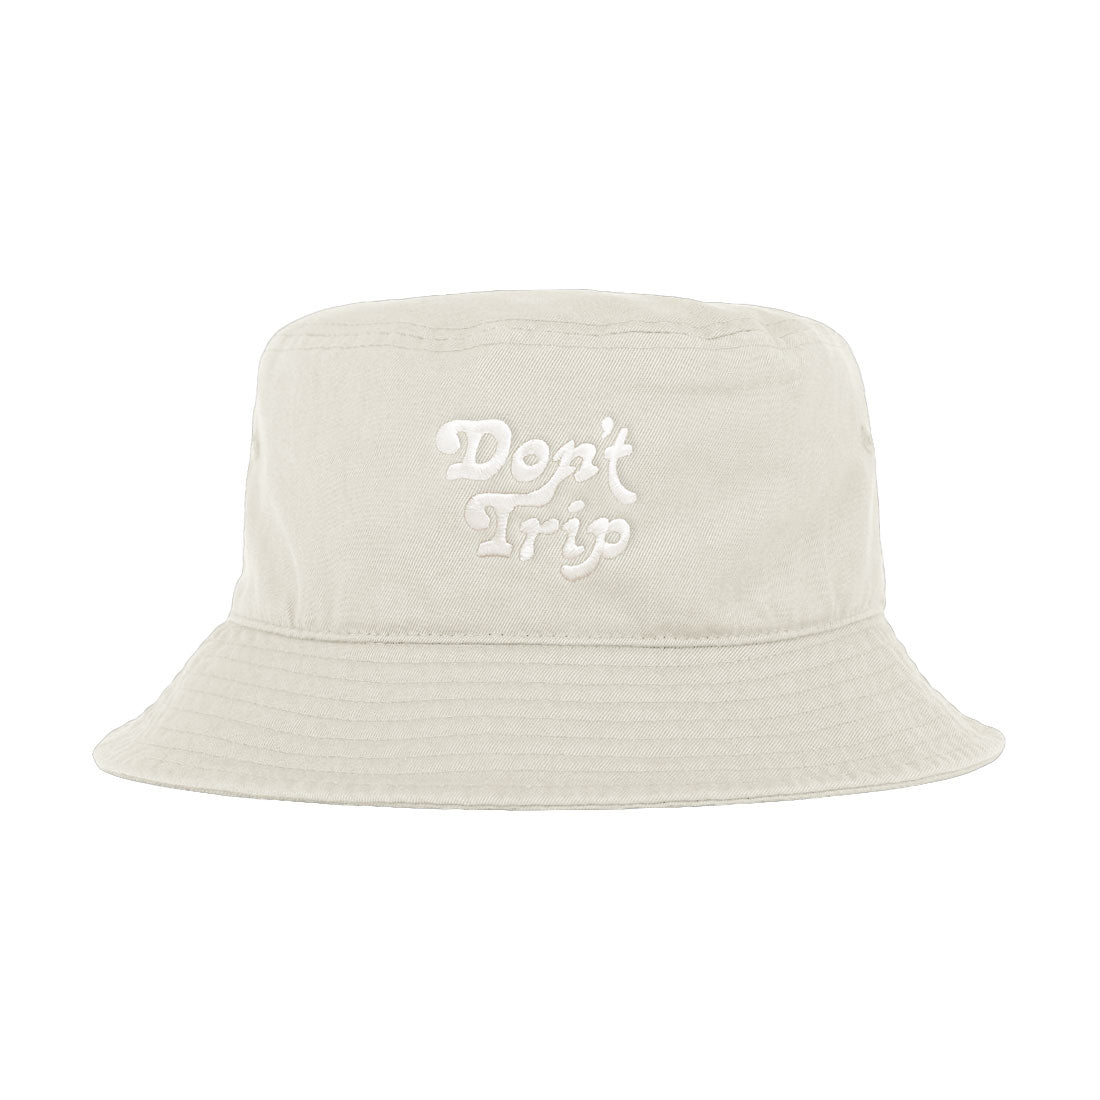 Free & Easy Don't Trip Bucket Hat in off-white with white Don't Trip embroidery on a white background -Free & Easy